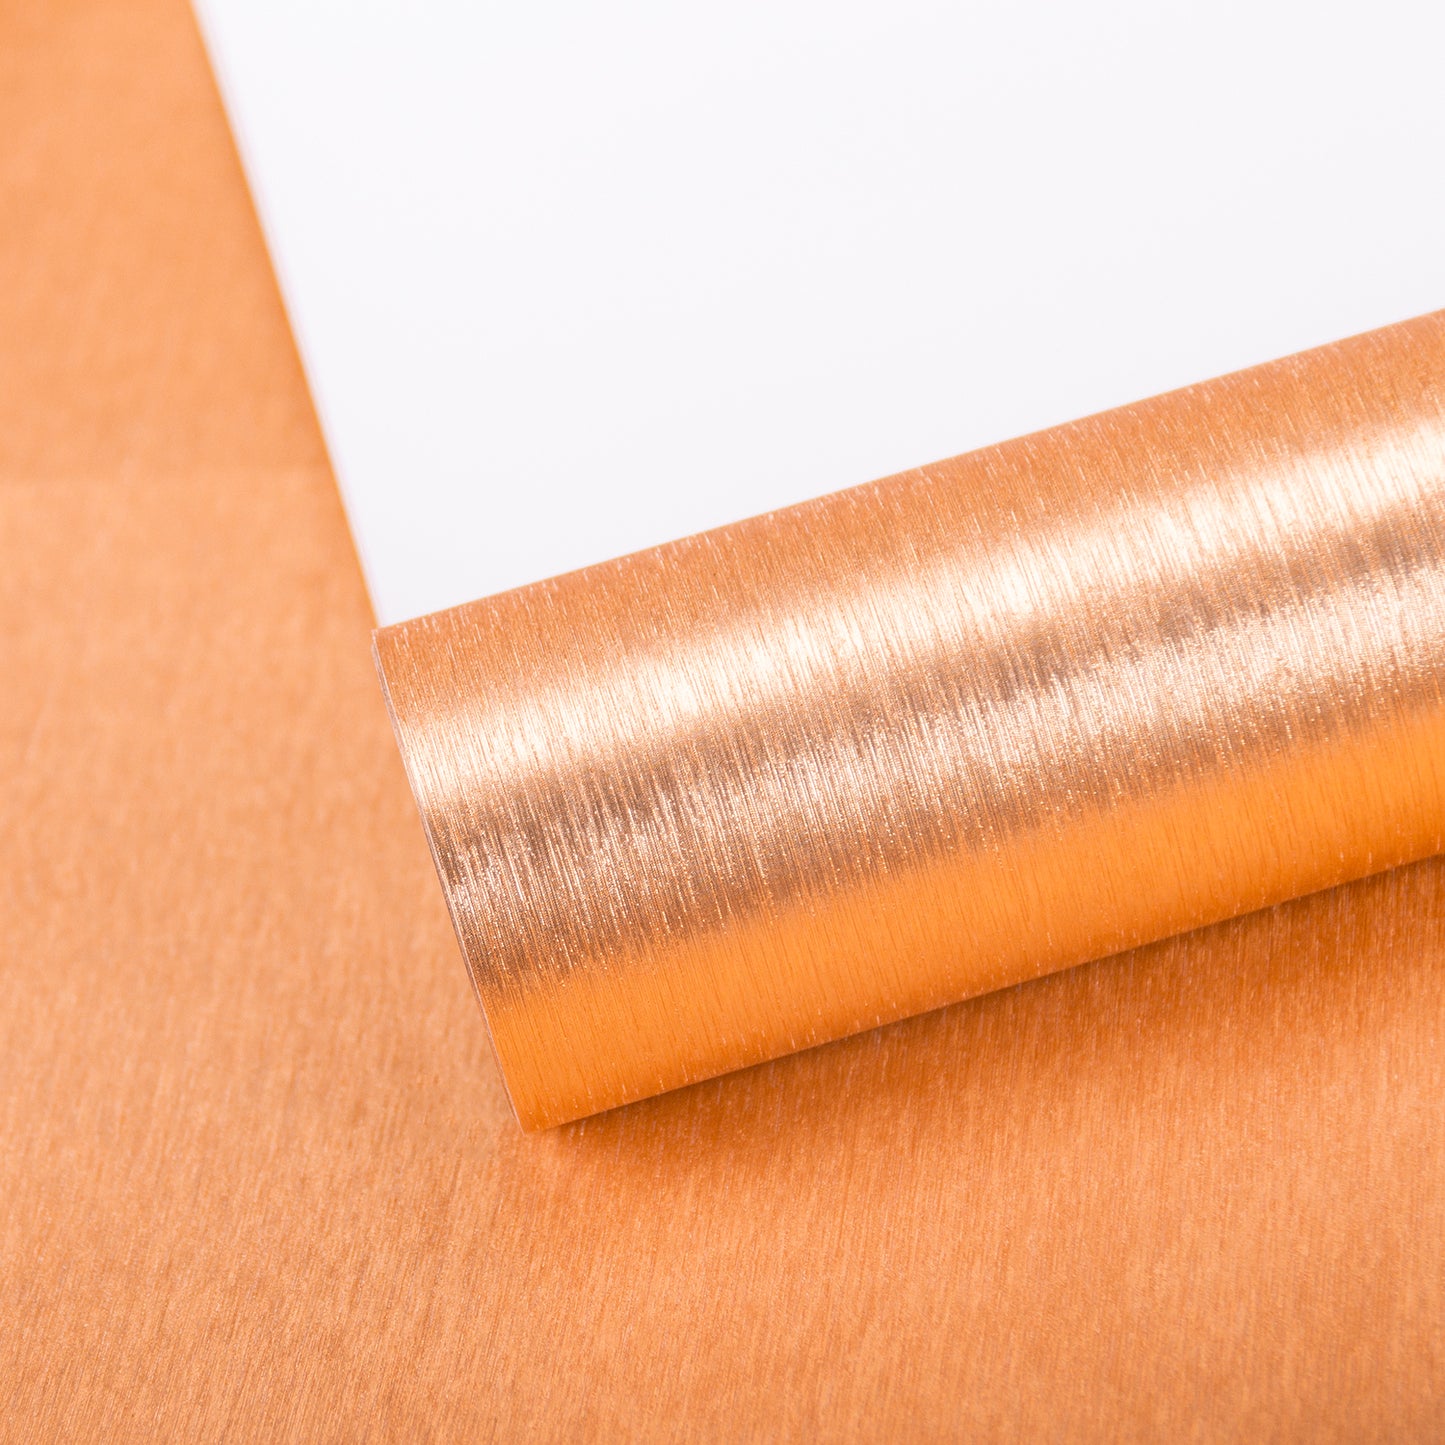 Brushed Aluminum Texture Metallic Wrapping Paper Roll Bronze